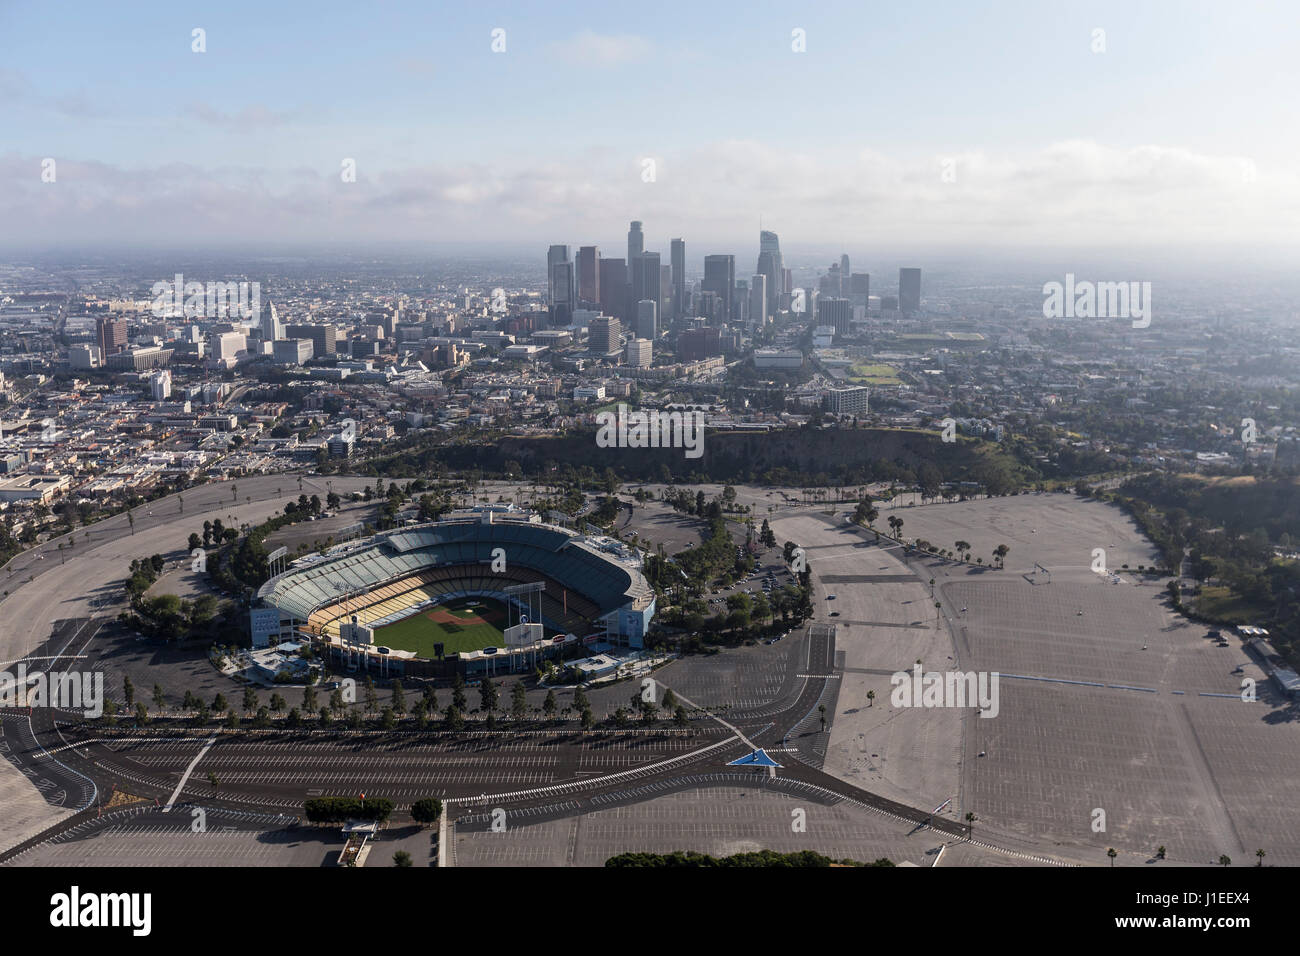 Los Angeles, California, USA - April 12, 2017:  Aerial view of the Dodger Stadium with downtown LA in background. Stock Photo